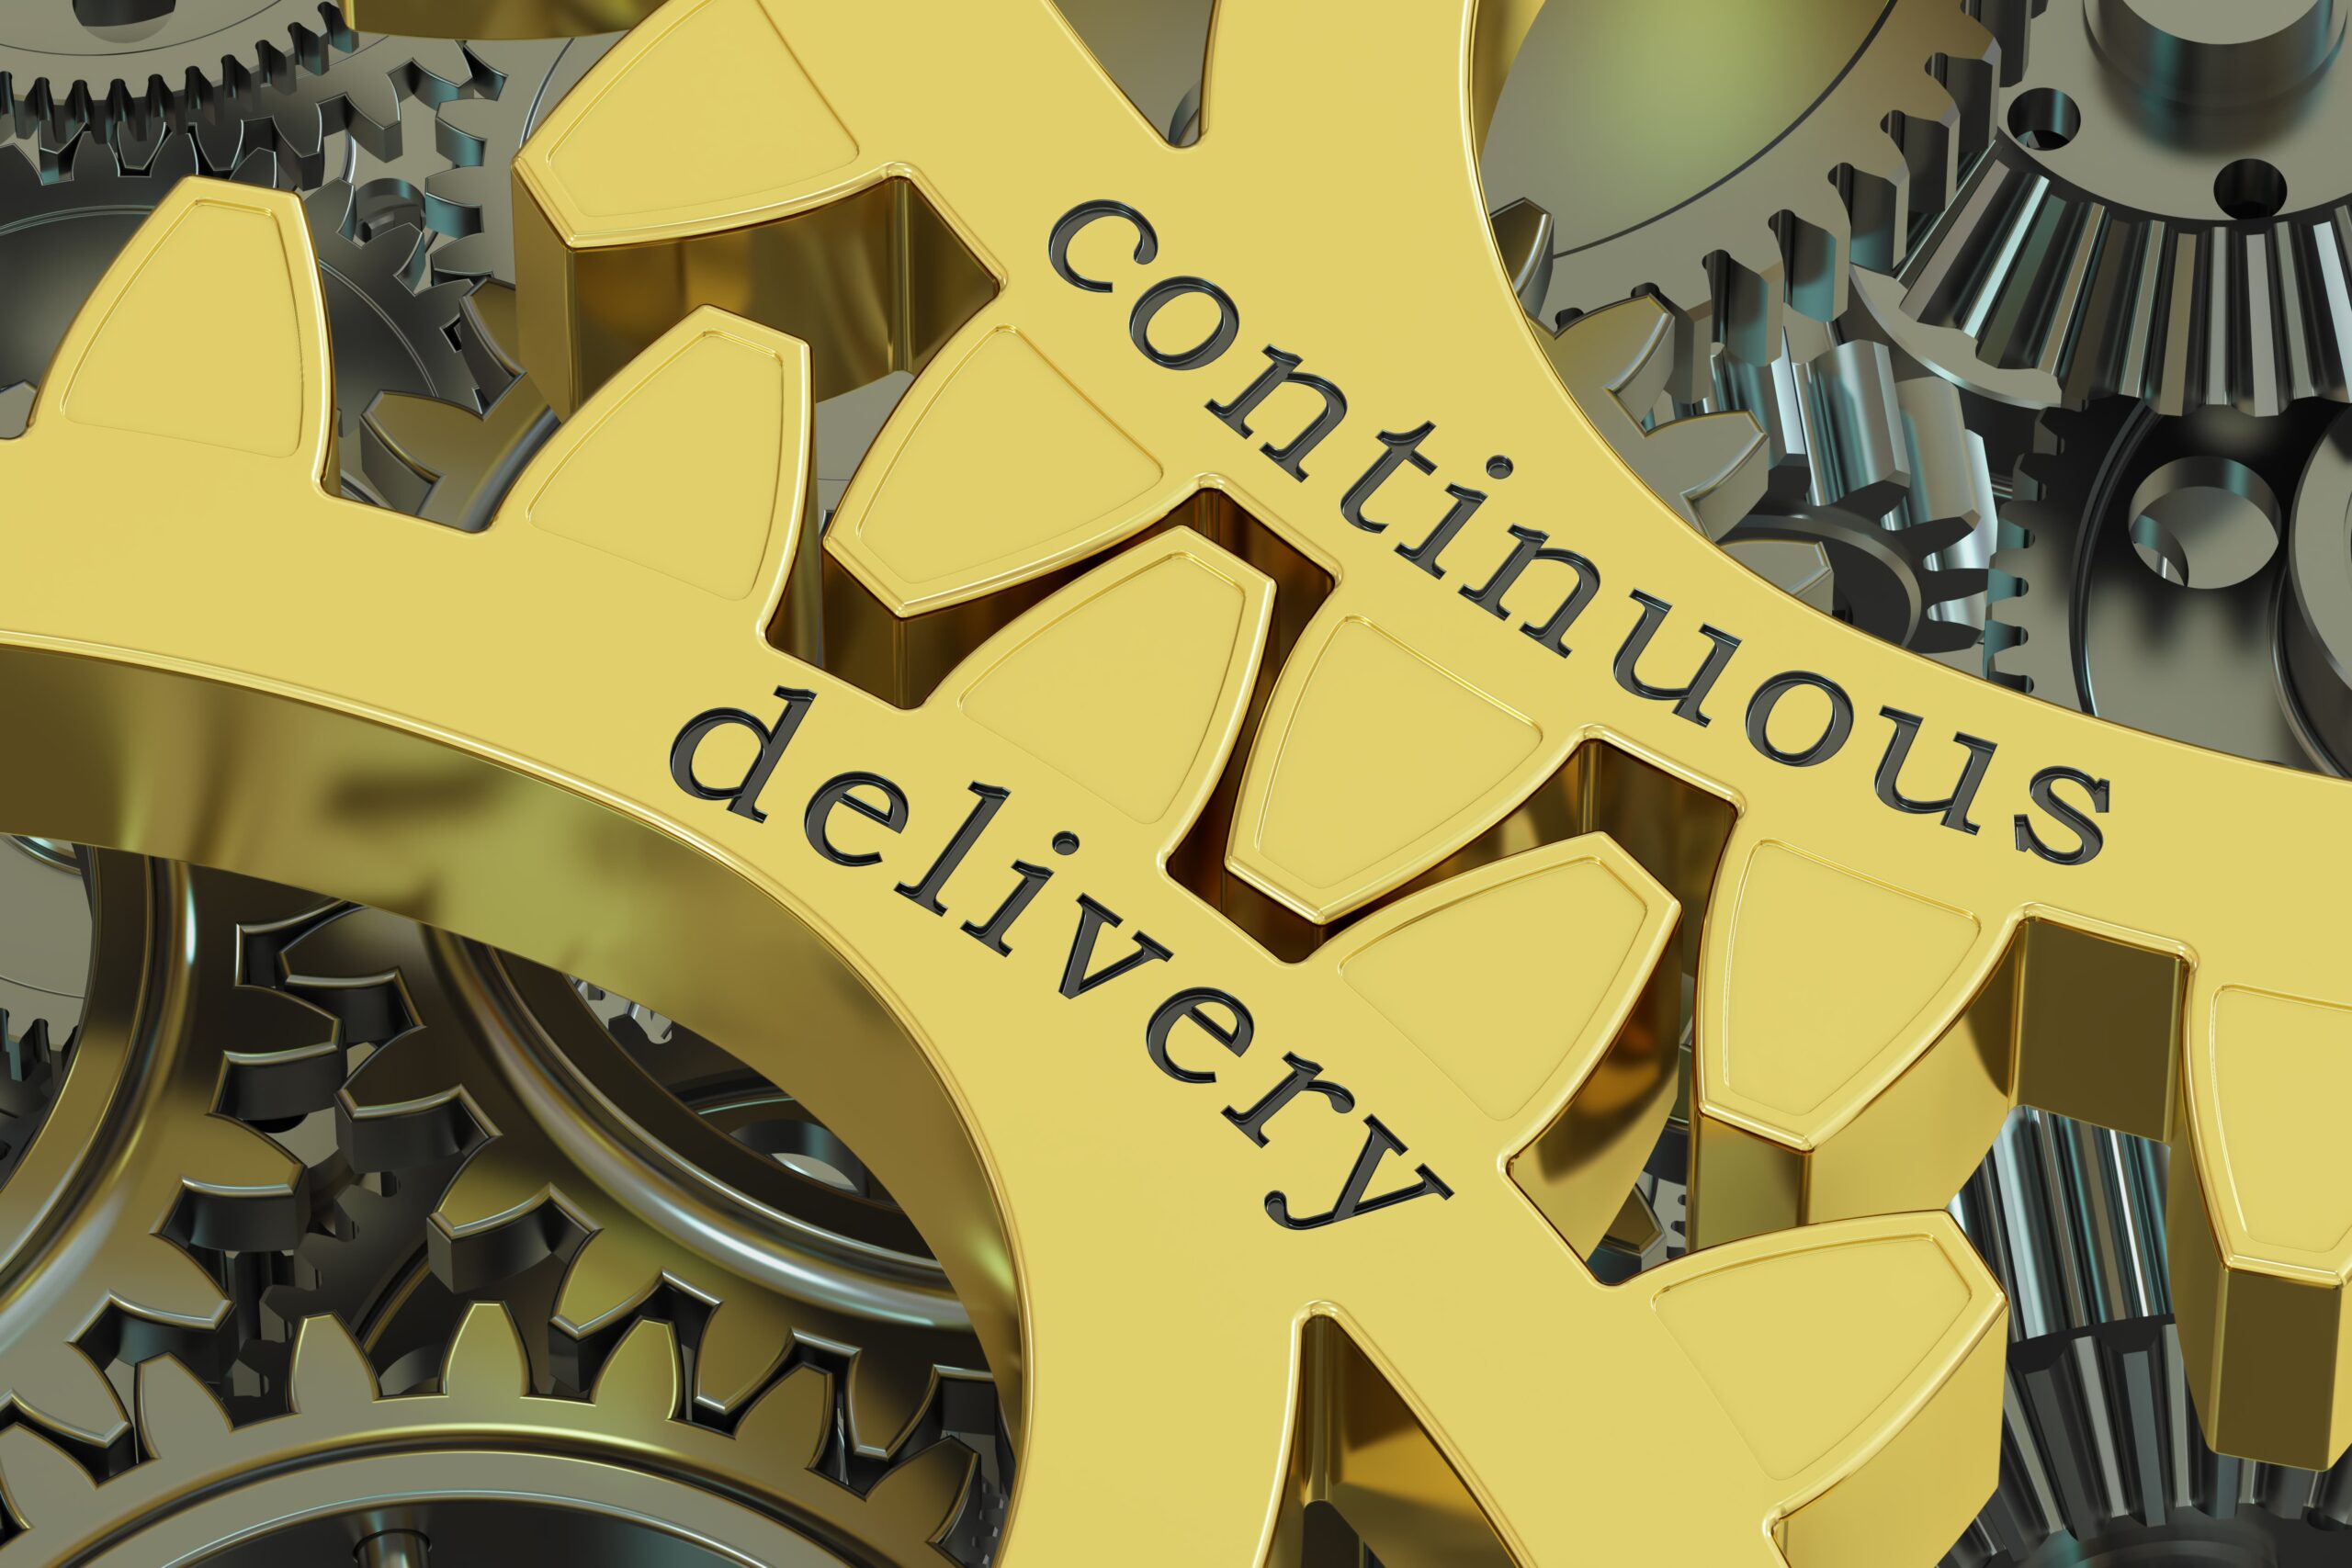 DevOps or Continuous Delivery